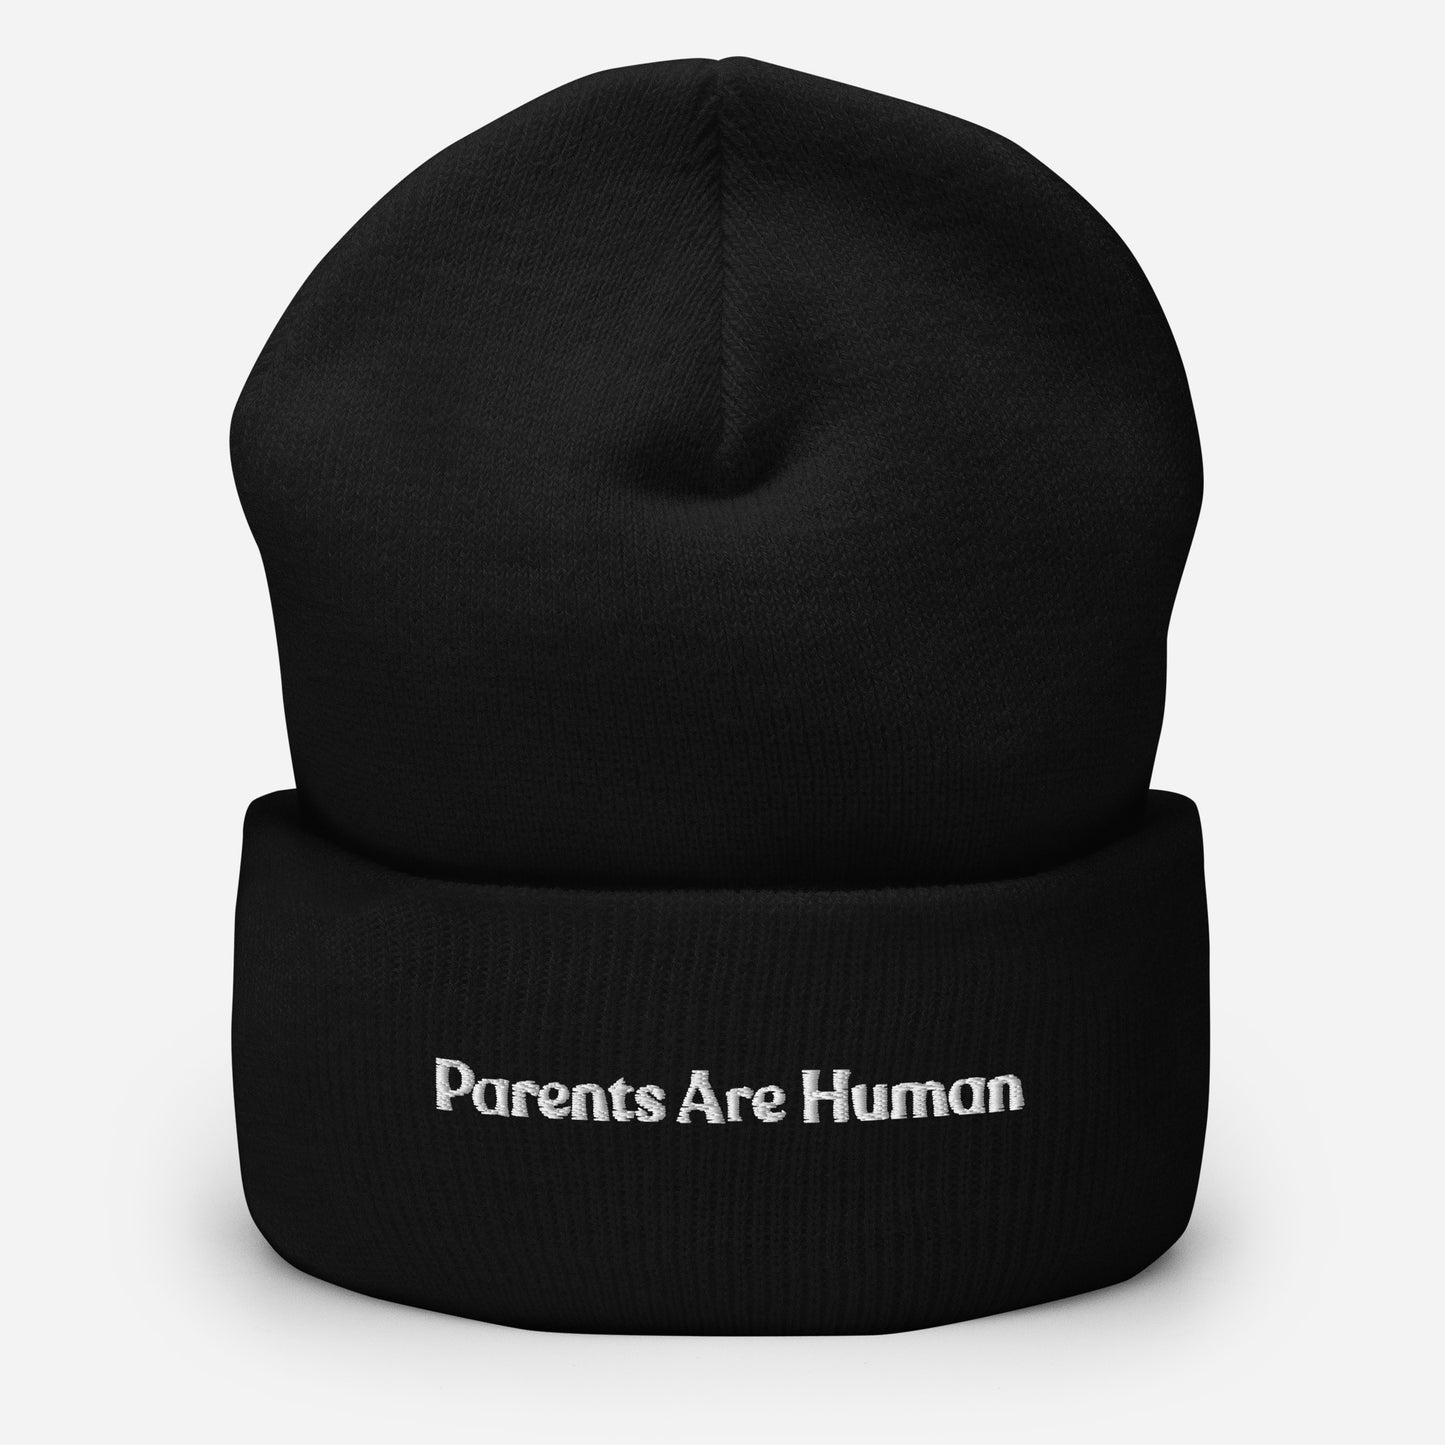 Knitted Beanie (Parents Are Human)